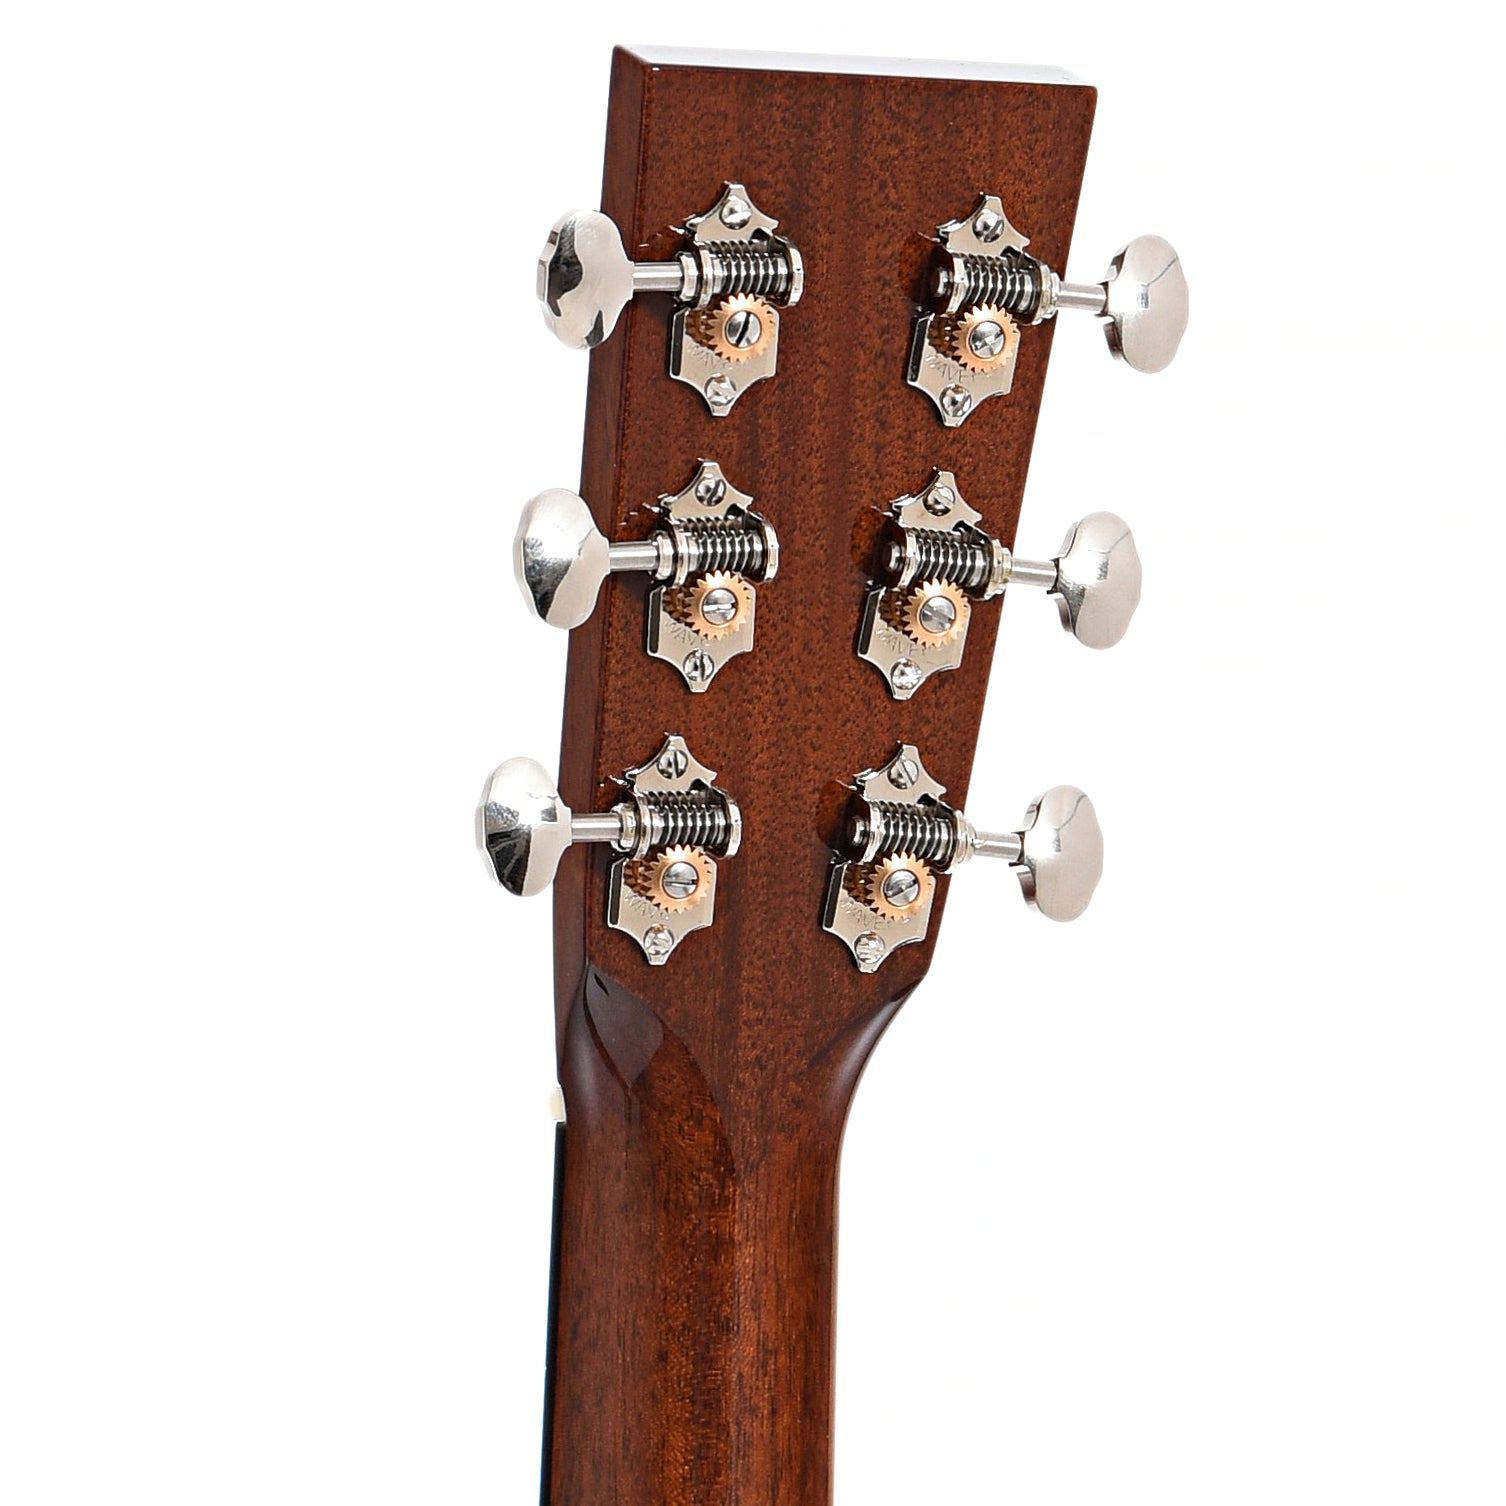 Back headstock of Collings 01 14-Fret Acoustic Guitar